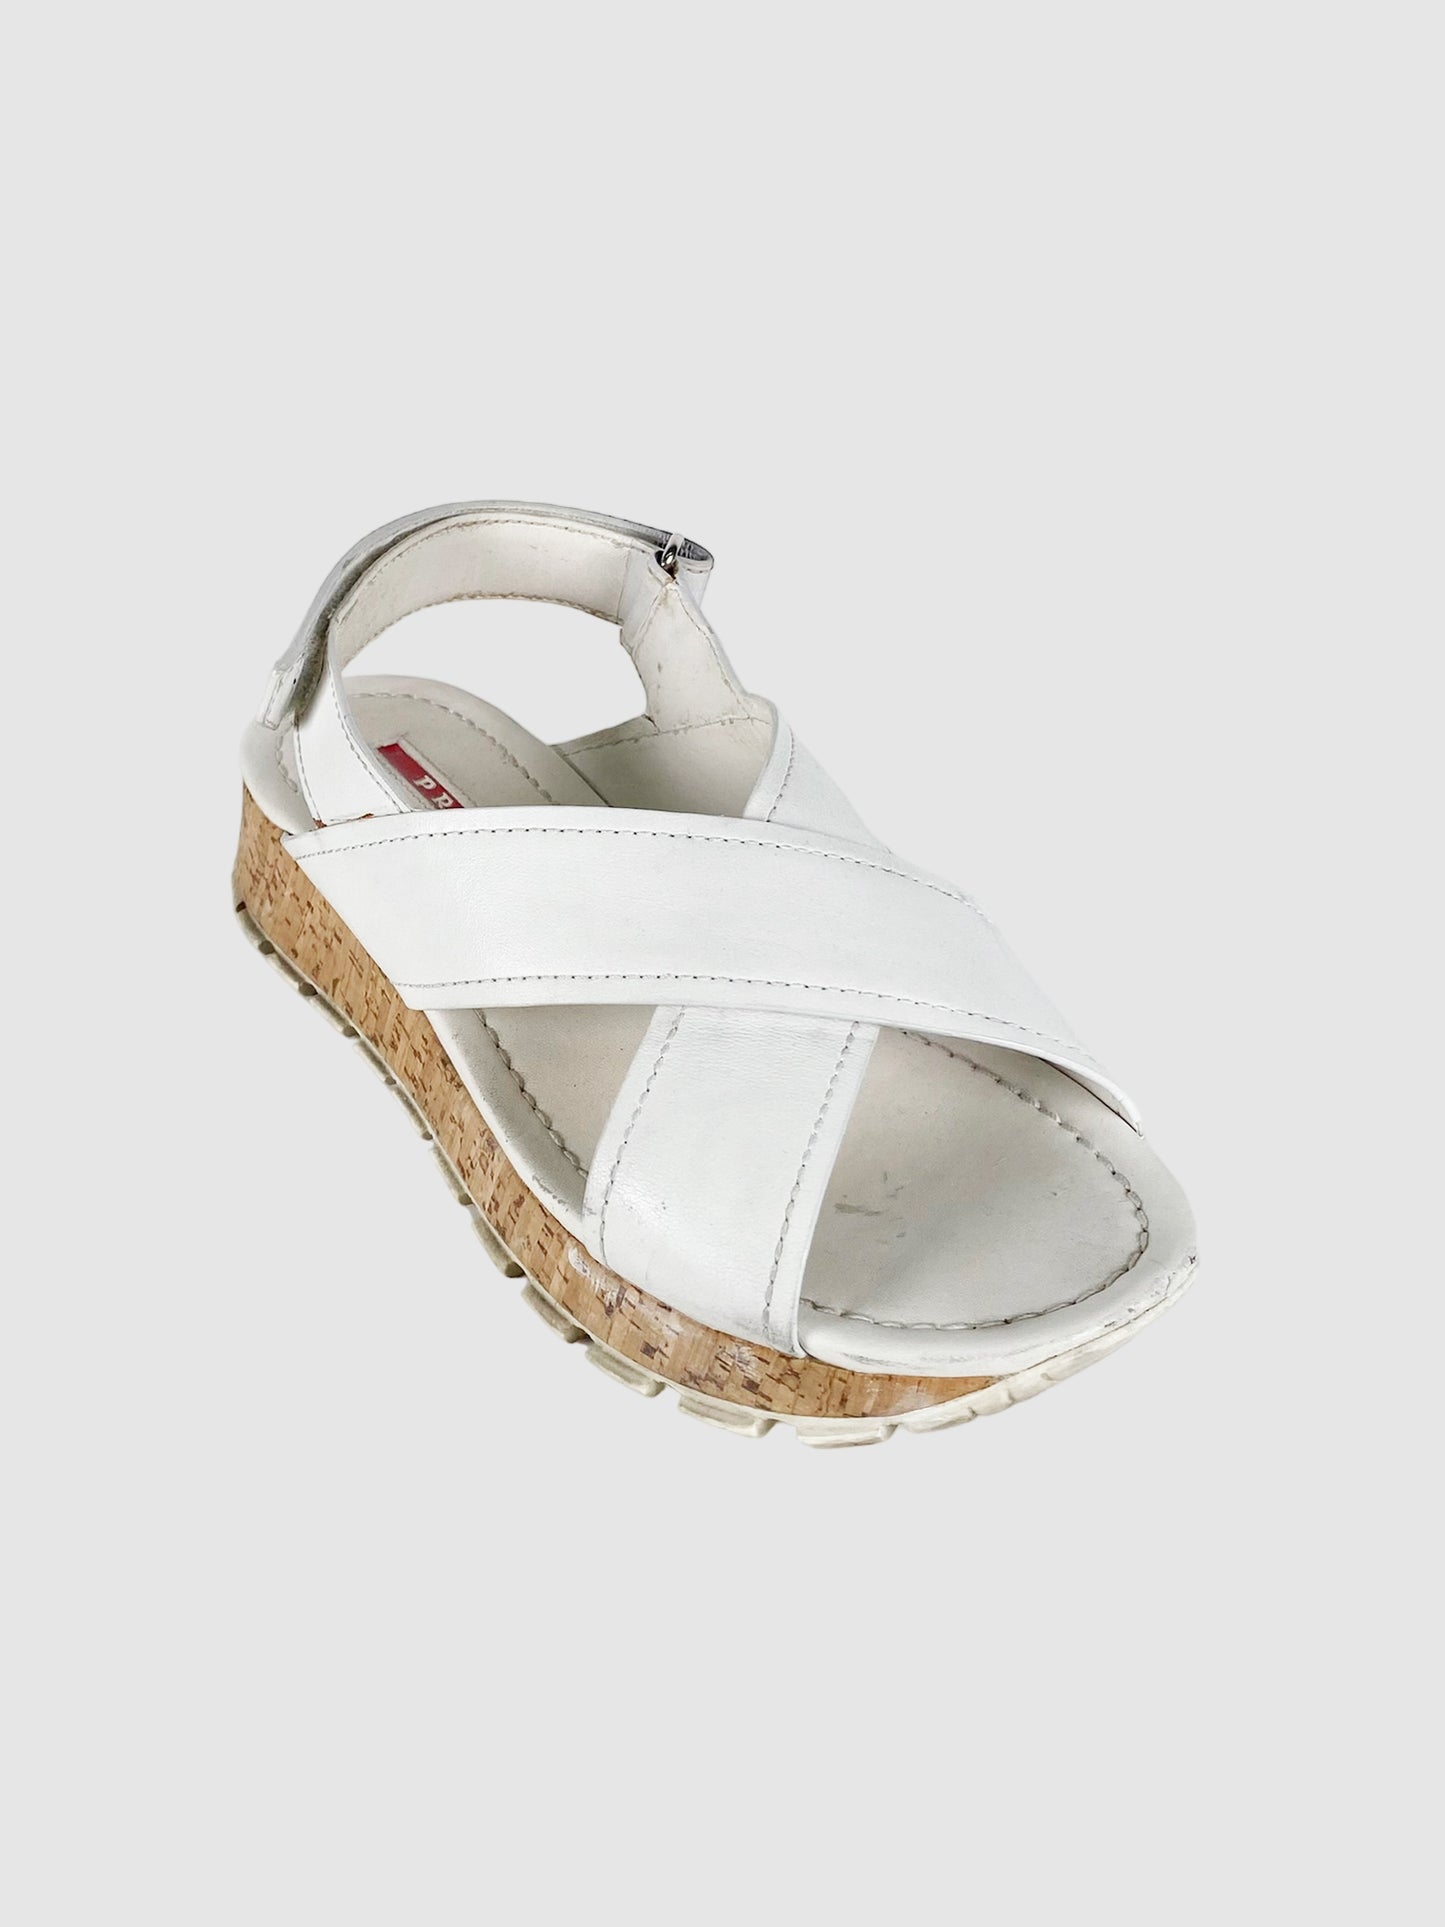 Leather Criss Cross Sandals - Size 35